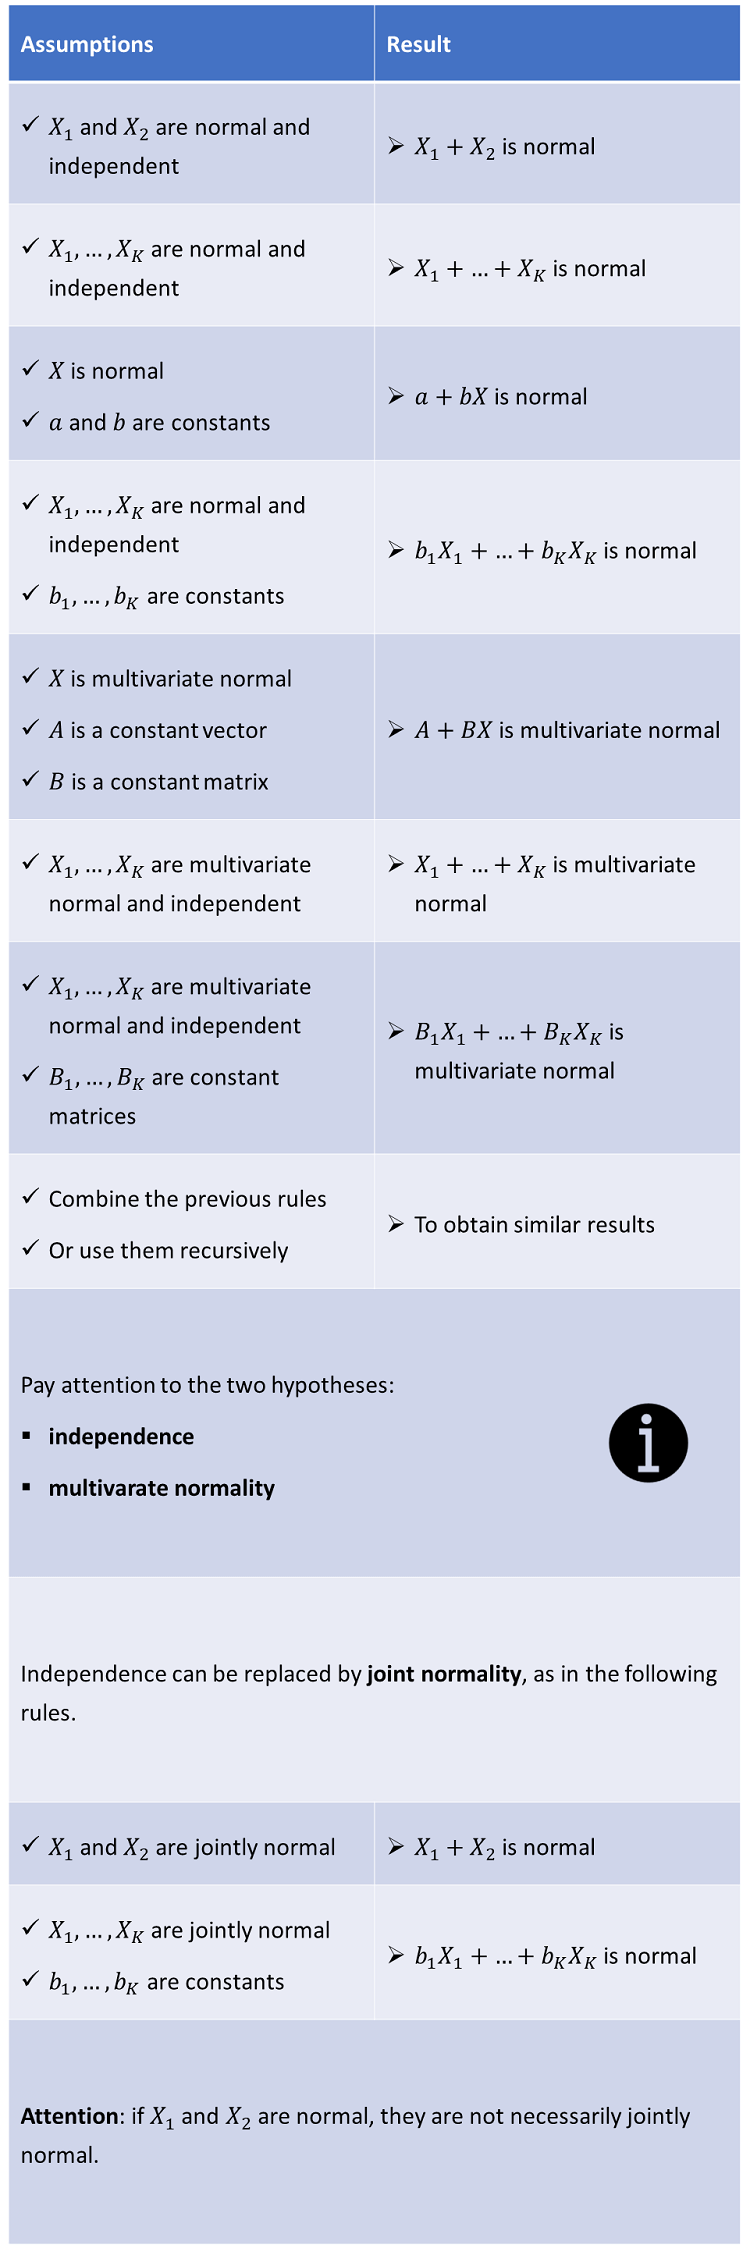 Infographic summarizing all the results about linear combinations of normal random variables which are proved below.